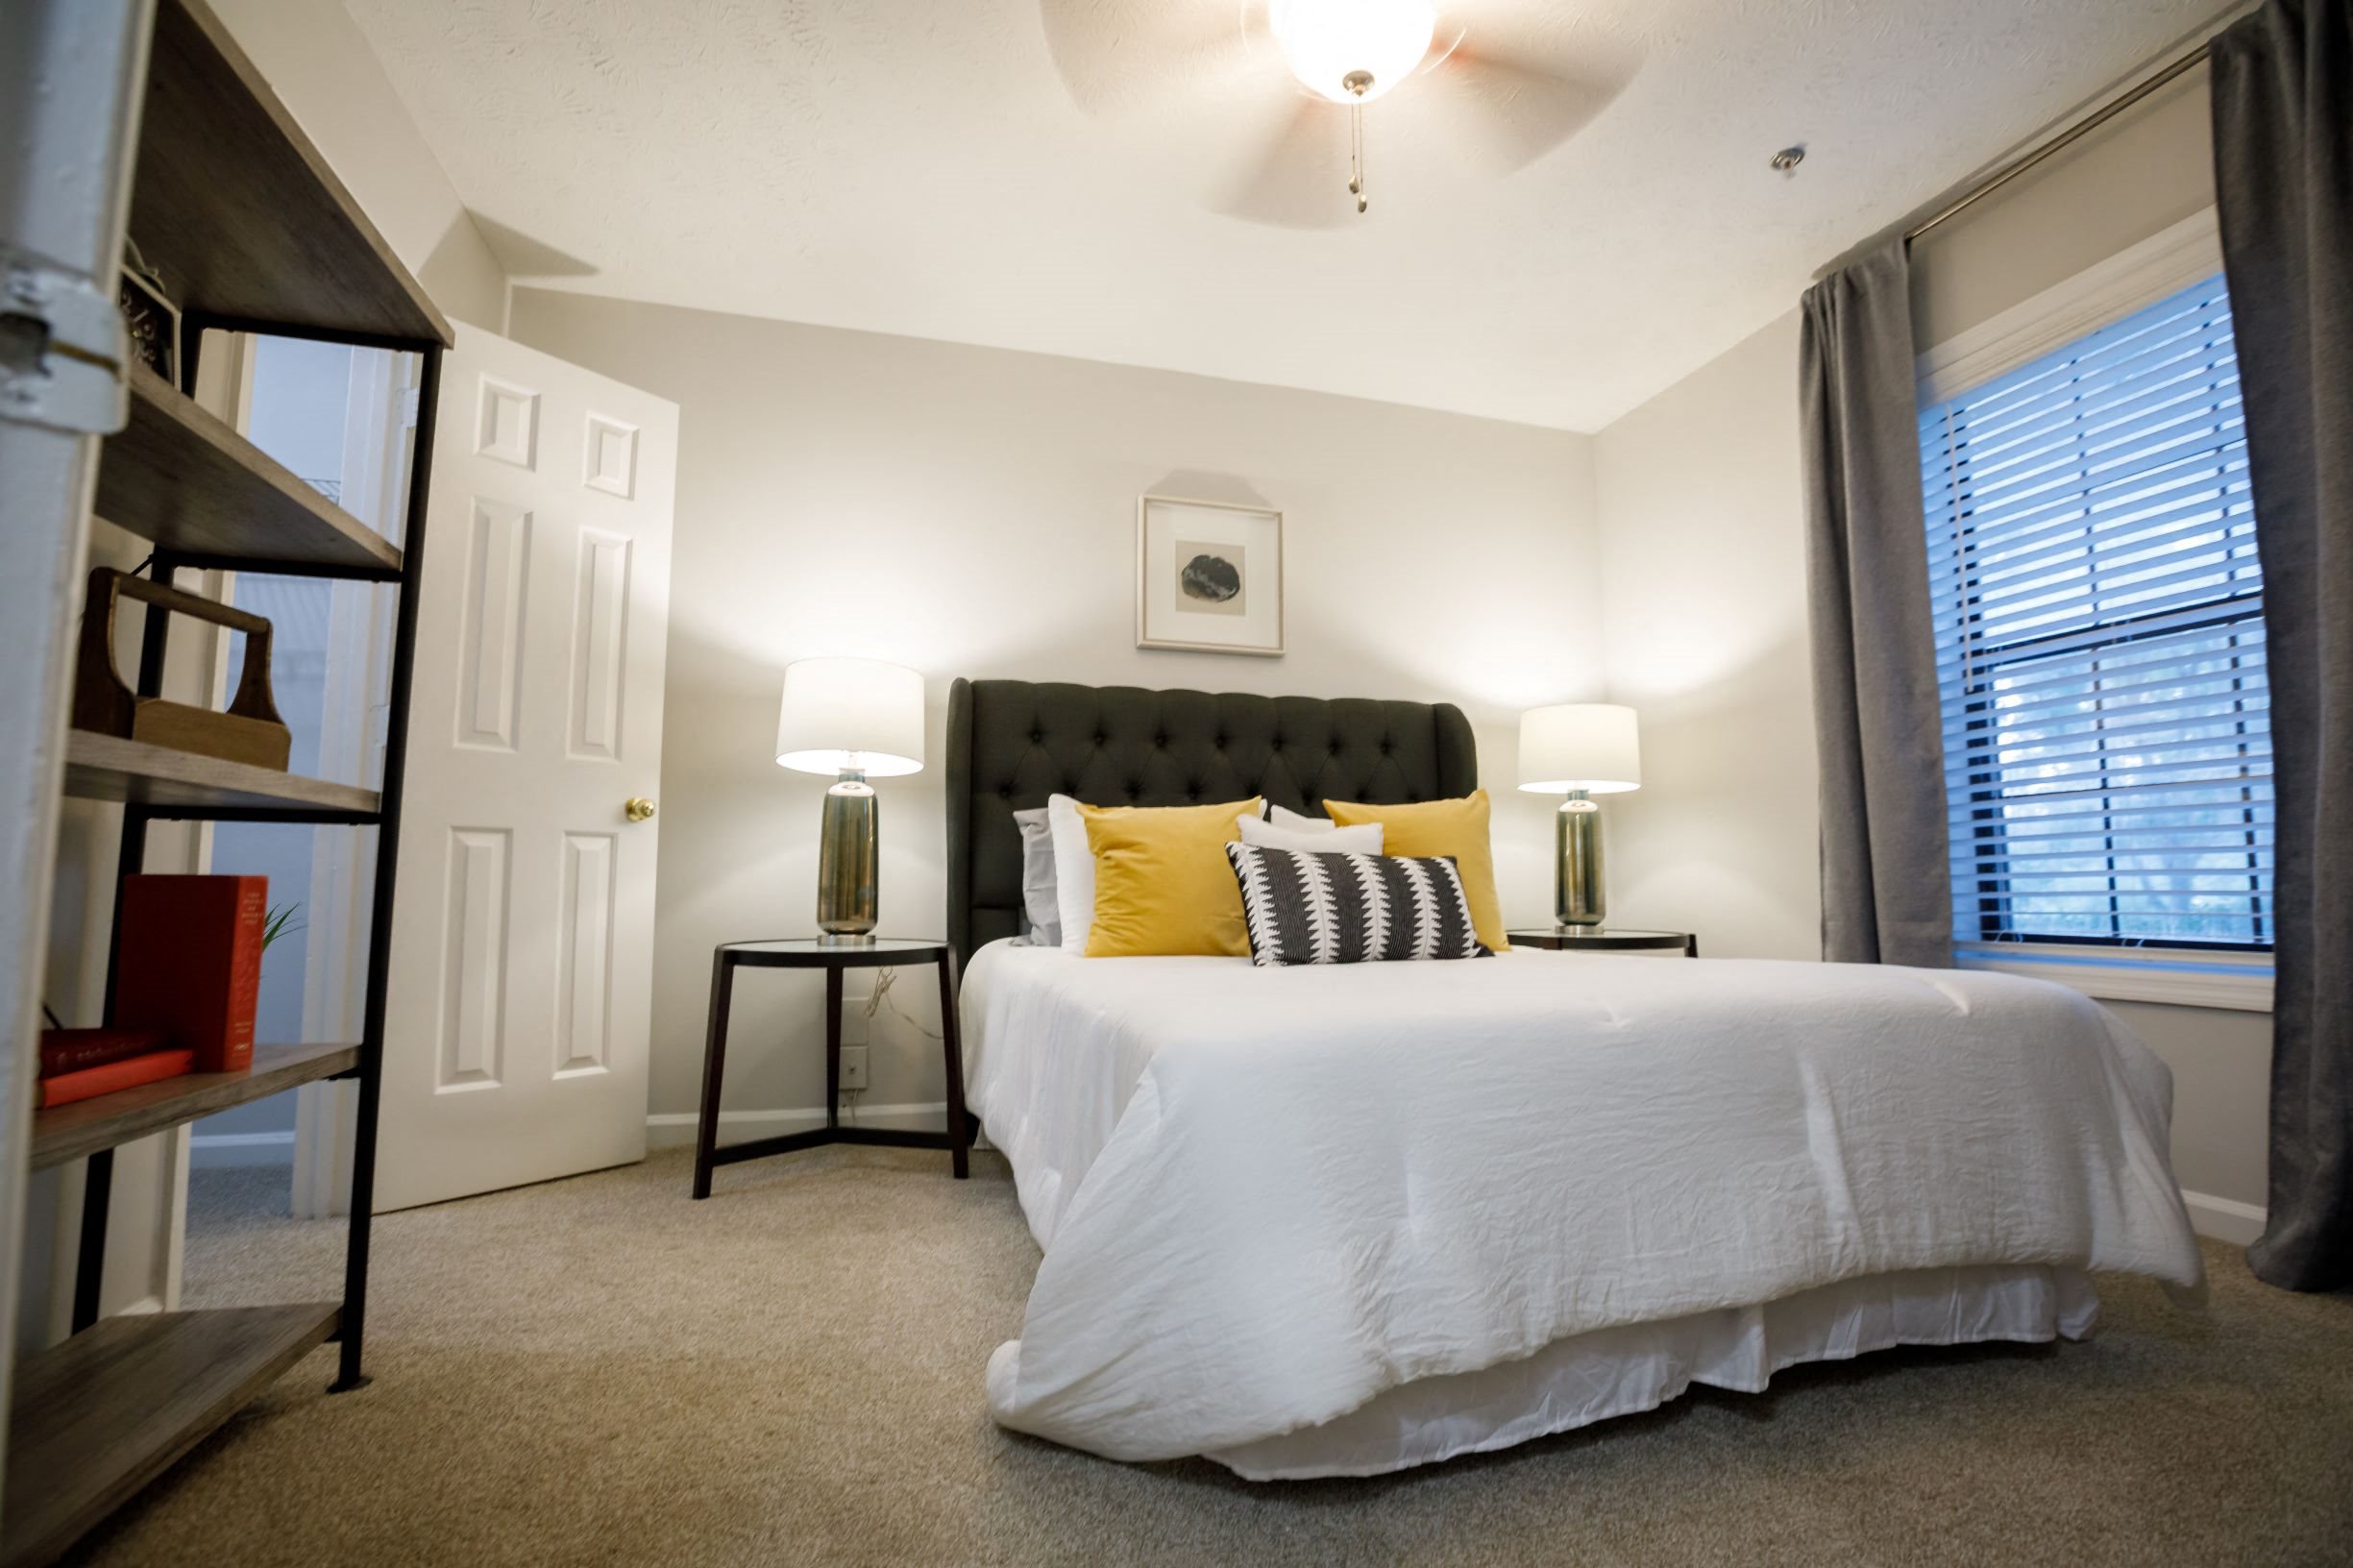 Spacious Bedroom at The Avenues of North Decatur in Decatur, GA.